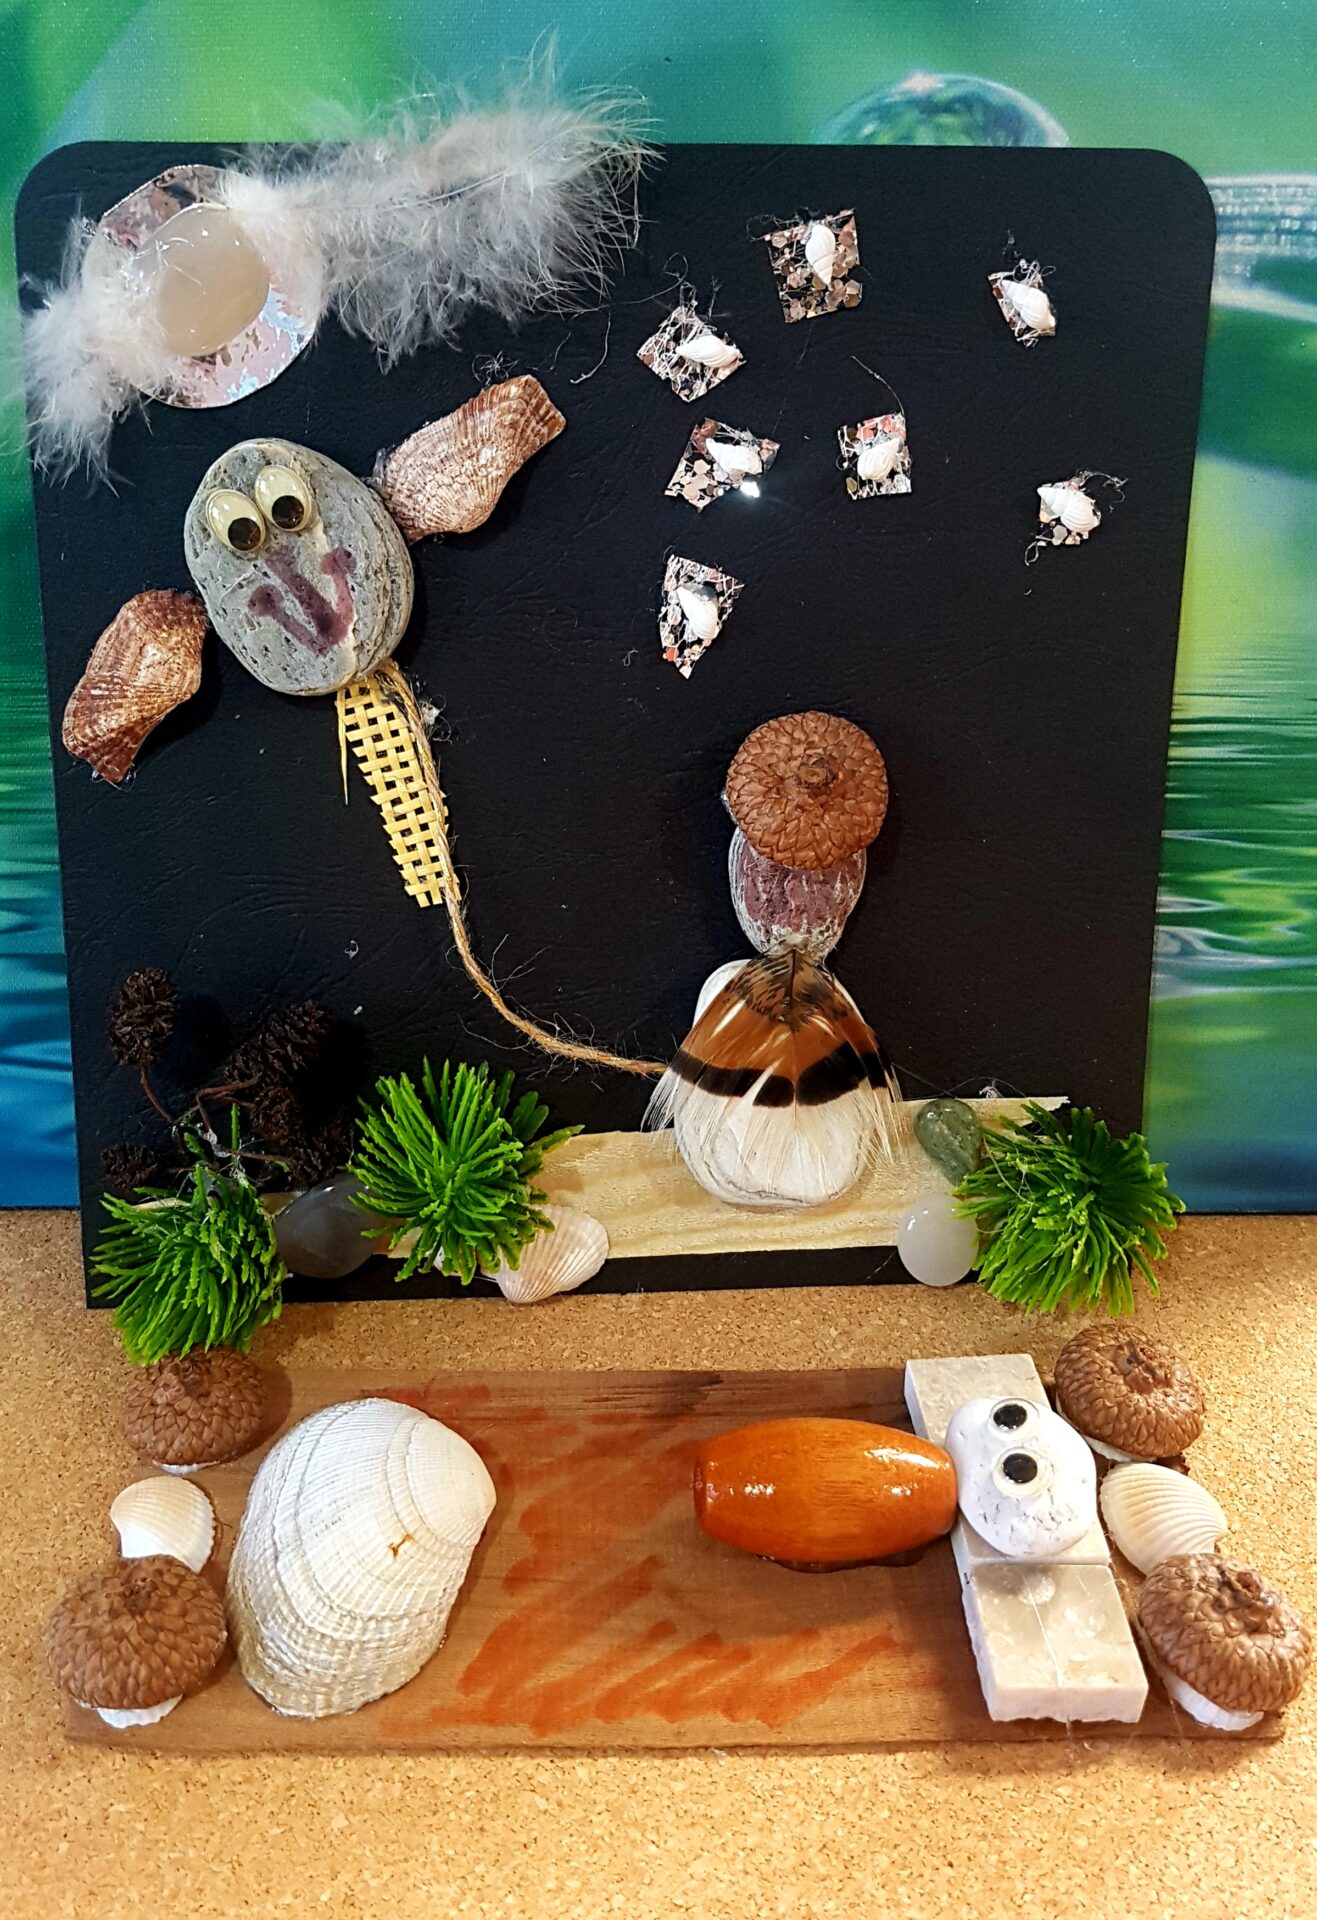 Image of Nature Craft – Rock and Pebble Art event